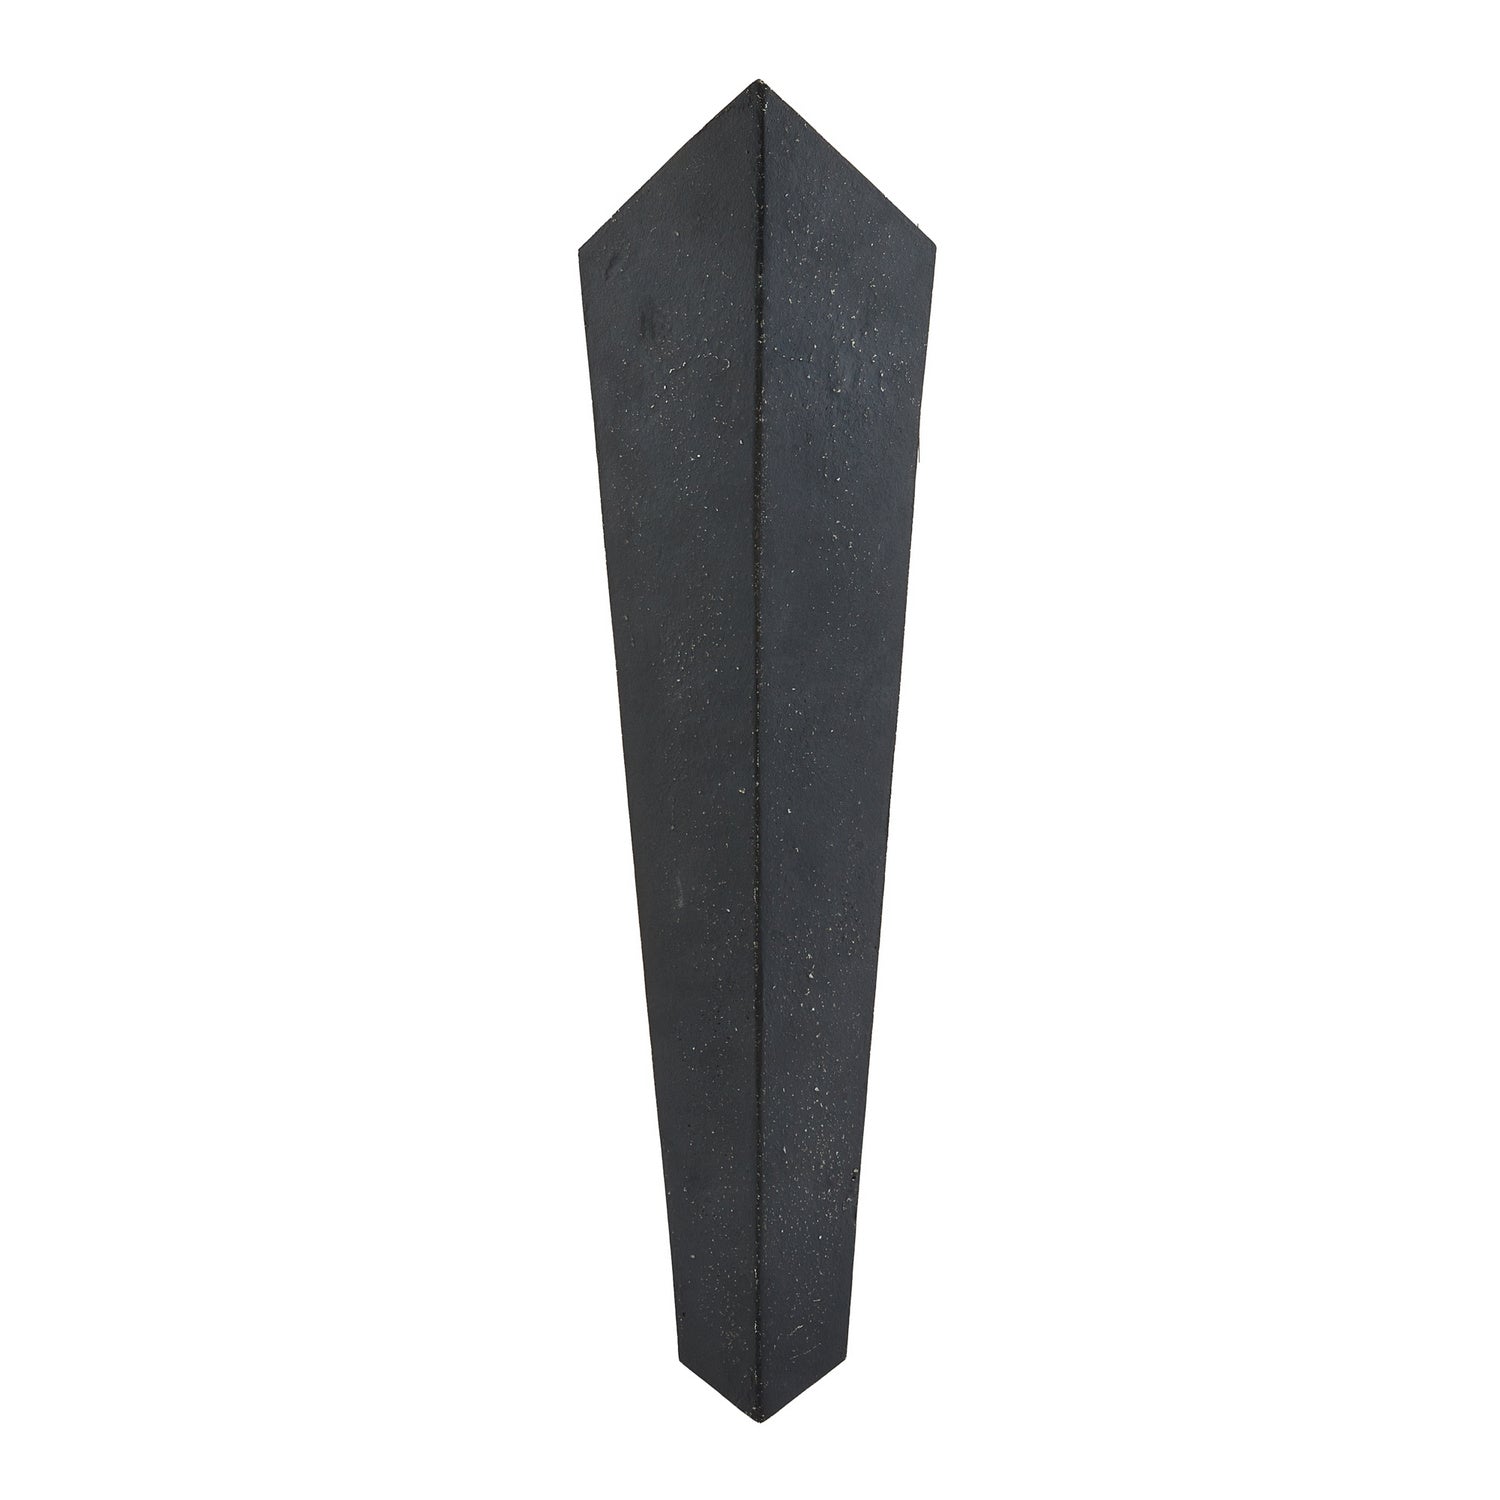 Three Light Wall Sconce from the Salvadoro collection in Matte Charcoal finish